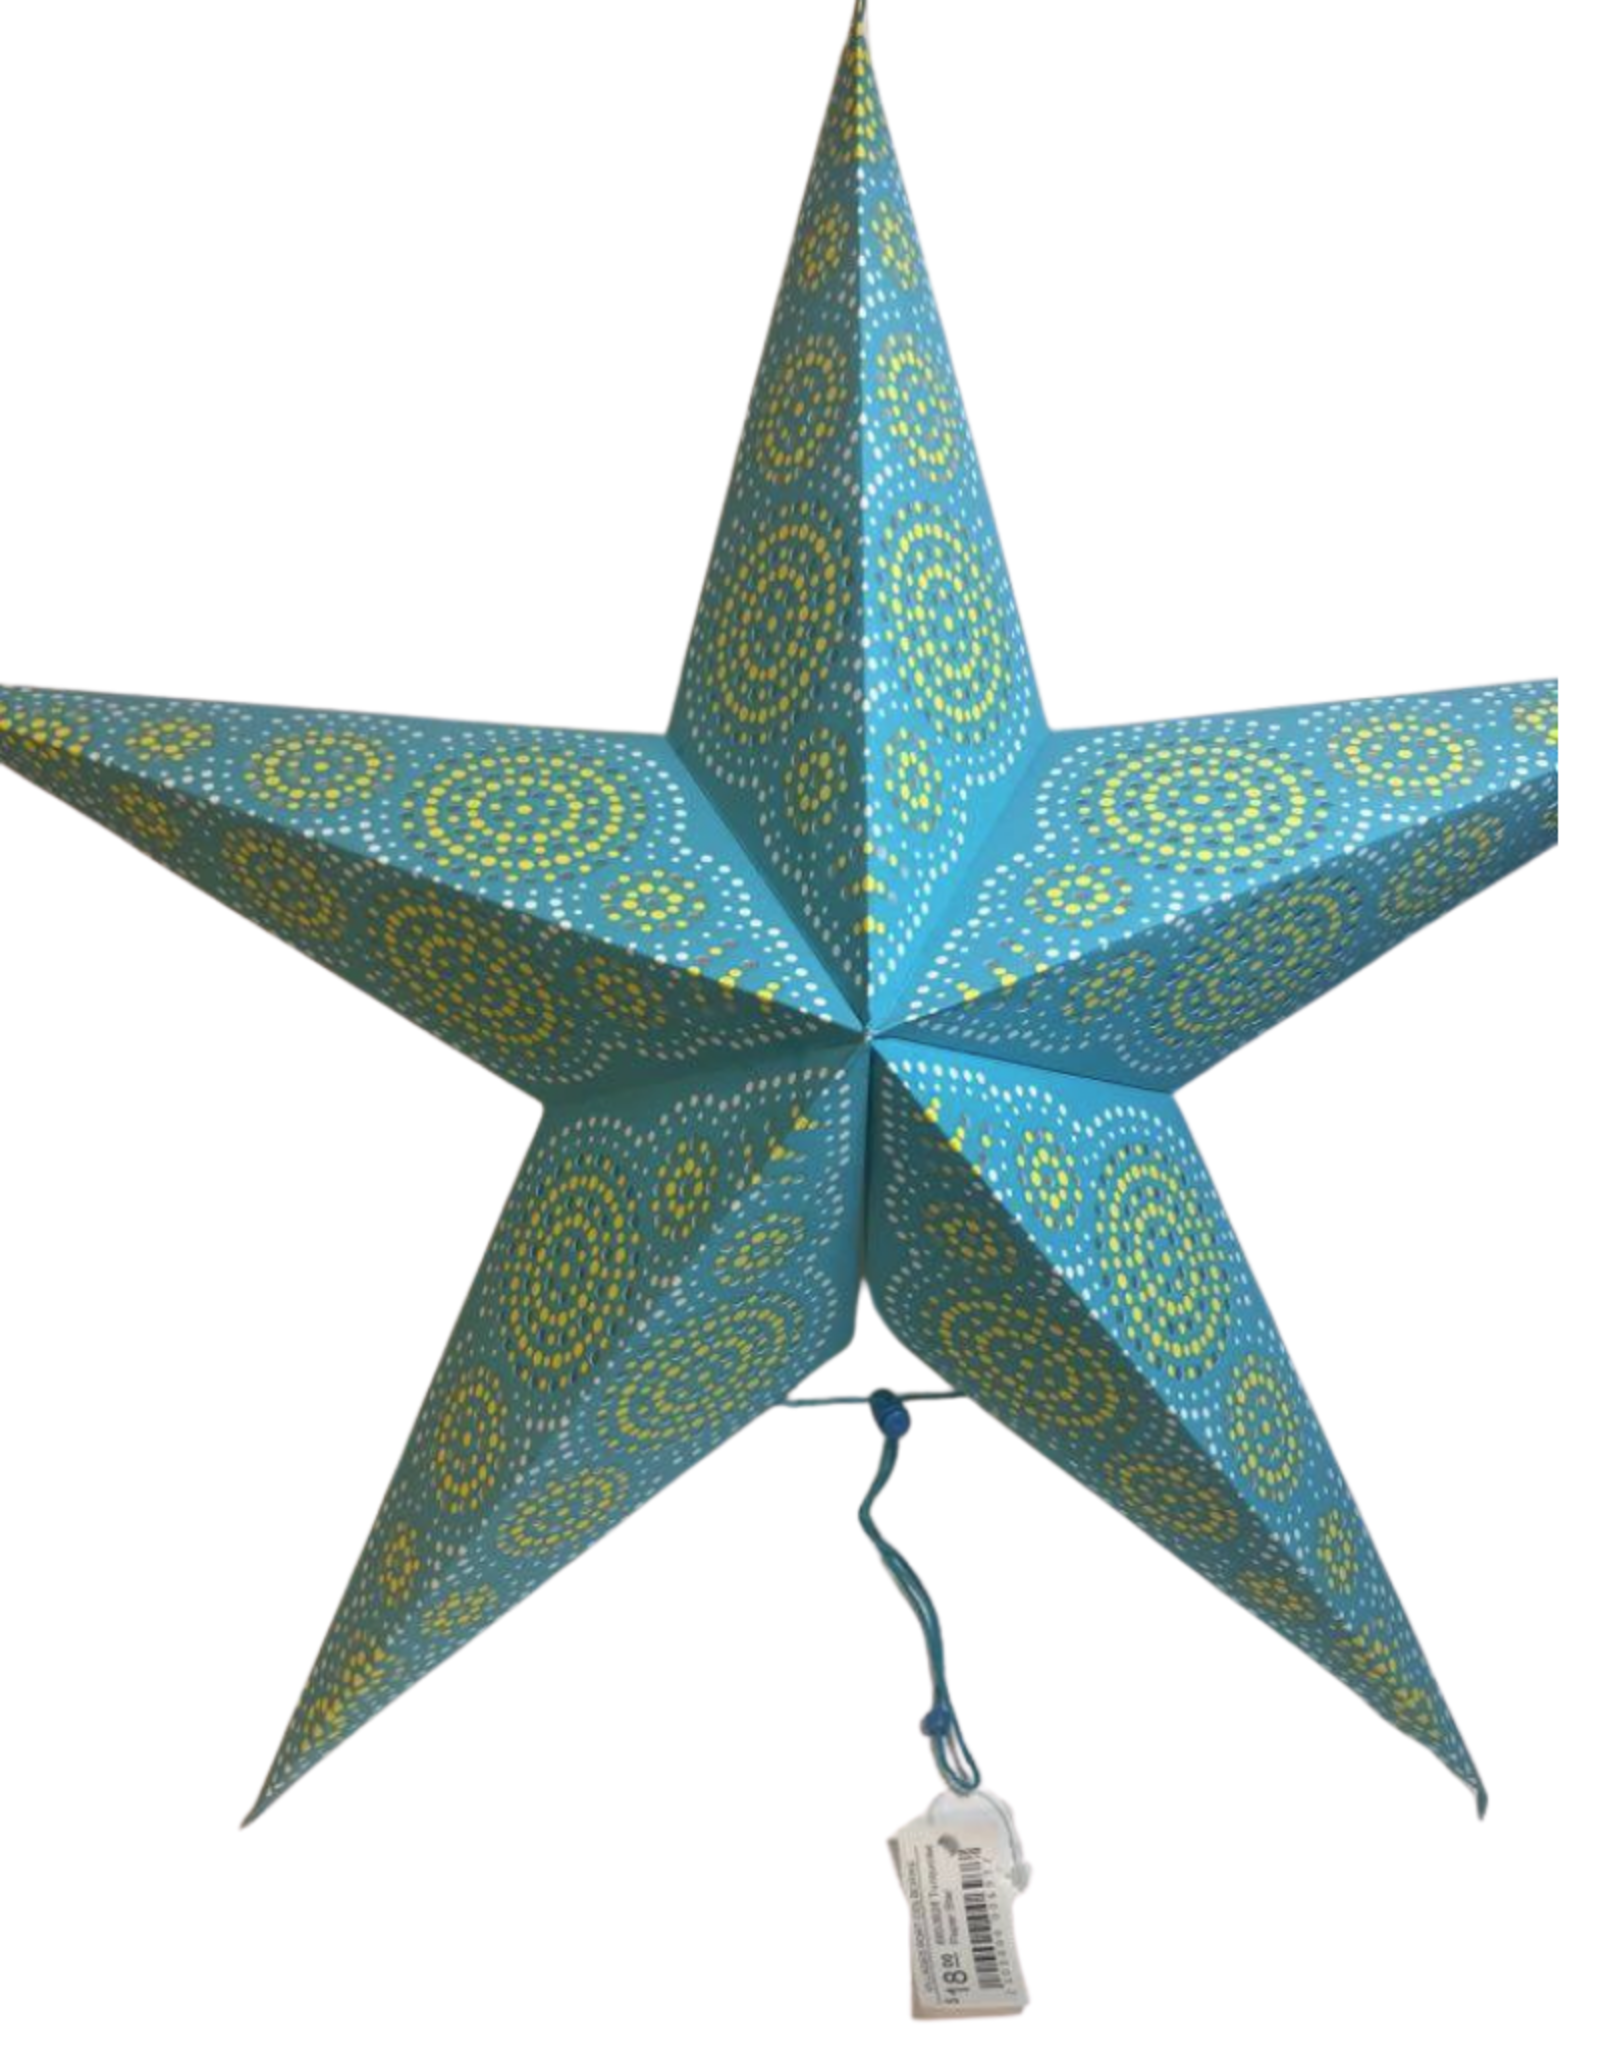 Ten Thousand Villages Turquoise Paper Star Hanging Decoration - India